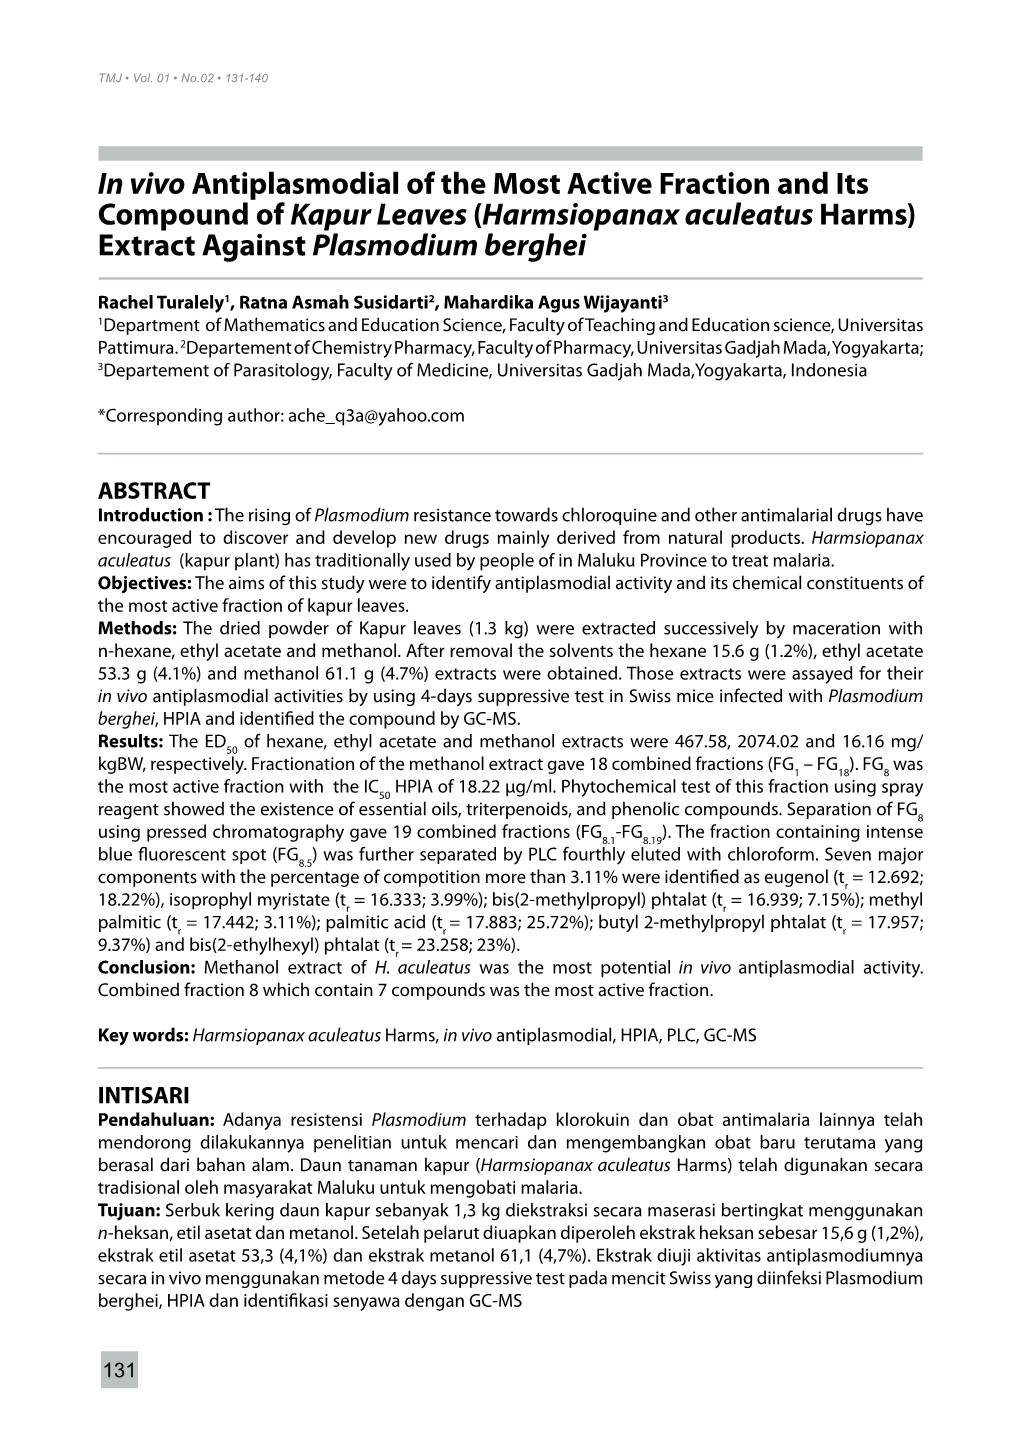 In Vivo Antiplasmodial of the Most Active Fraction and Its Compound of Kapur Leaves (Harmsiopanax Aculeatus Harms) Extract Against Plasmodium Berghei